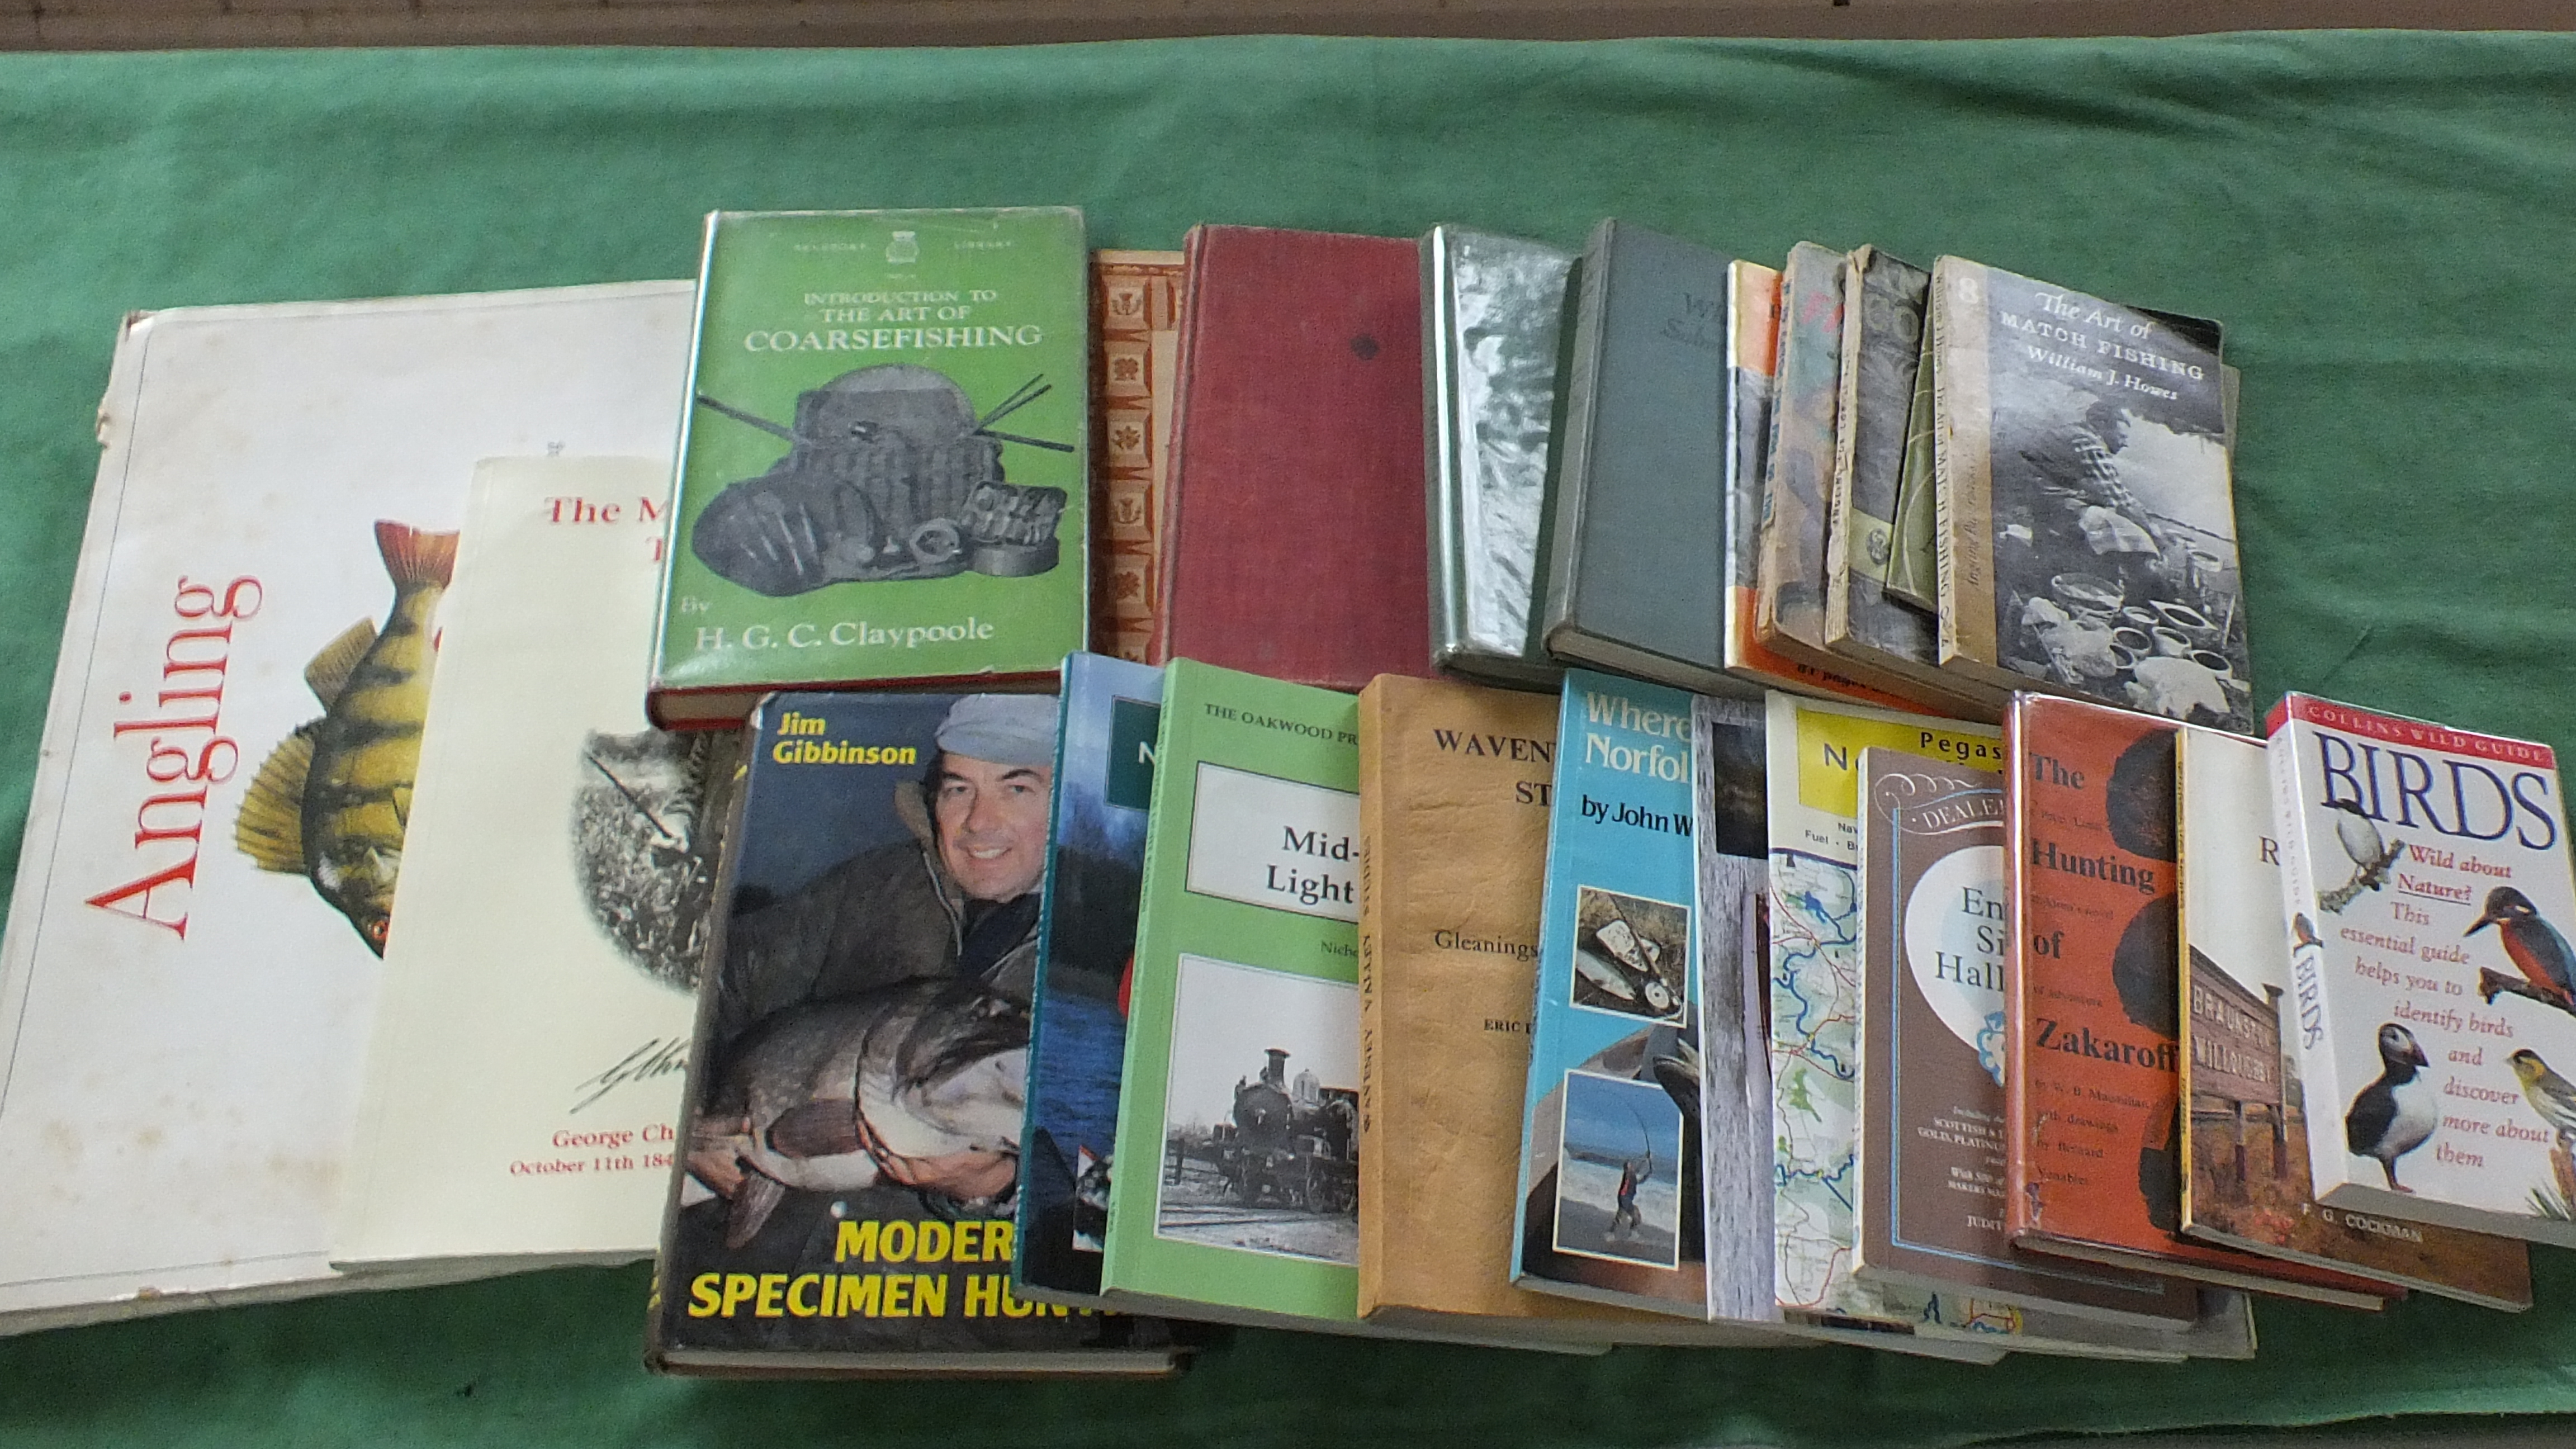 A selection of vintage books on coarse fishing including The Art of Coarse Fishing by HGC Claypoole,